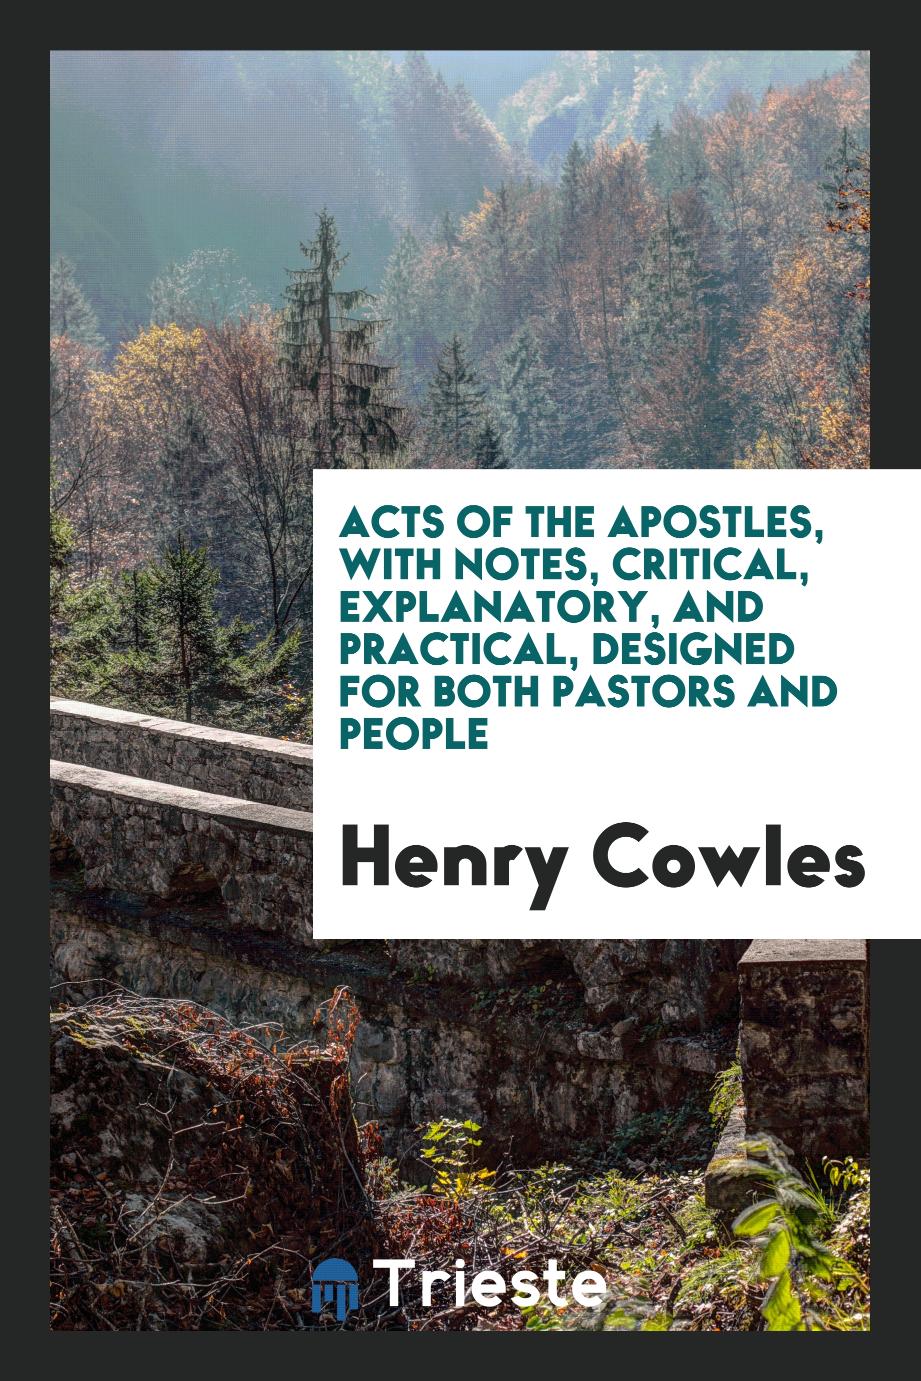 Acts of the Apostles, with notes, critical, explanatory, and practical, designed for both pastors and people